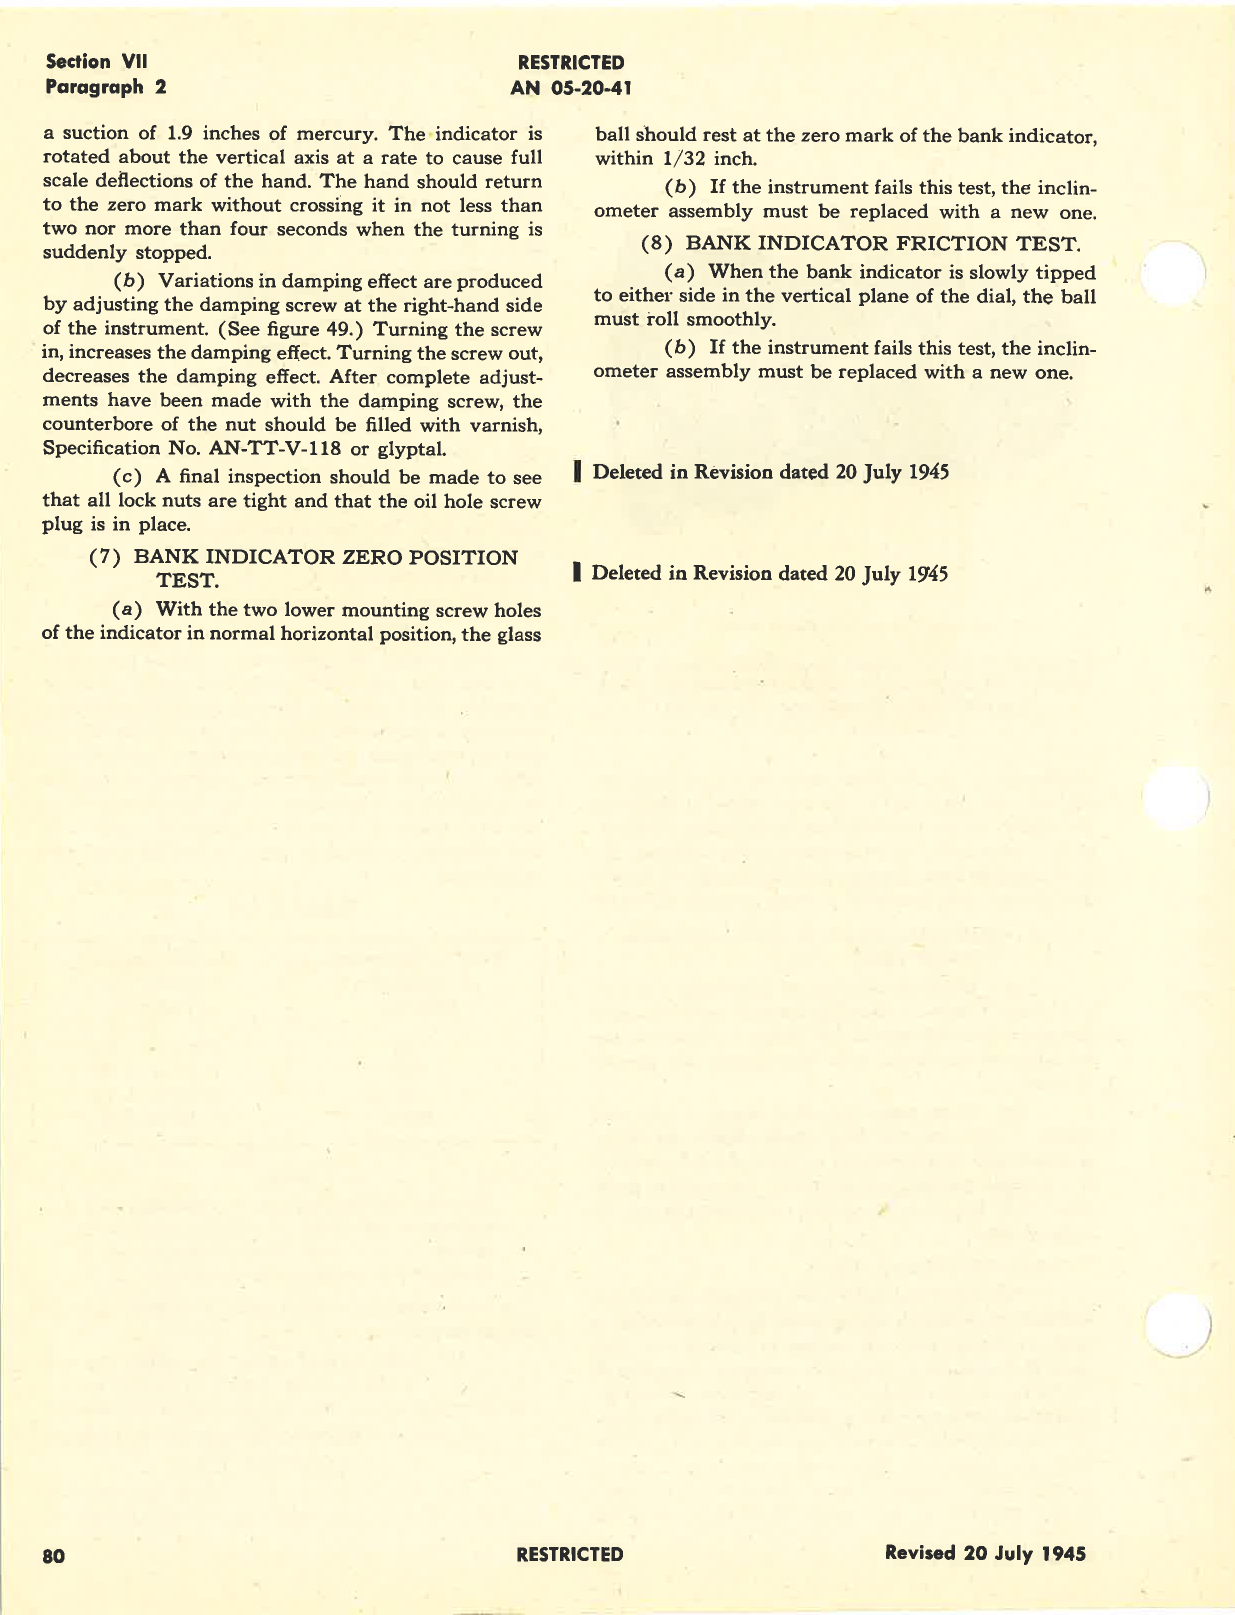 Sample page 8 from AirCorps Library document: Operation, Service, & Overhaul Instructions with Parts Catalog for Turn and Bank Indicators